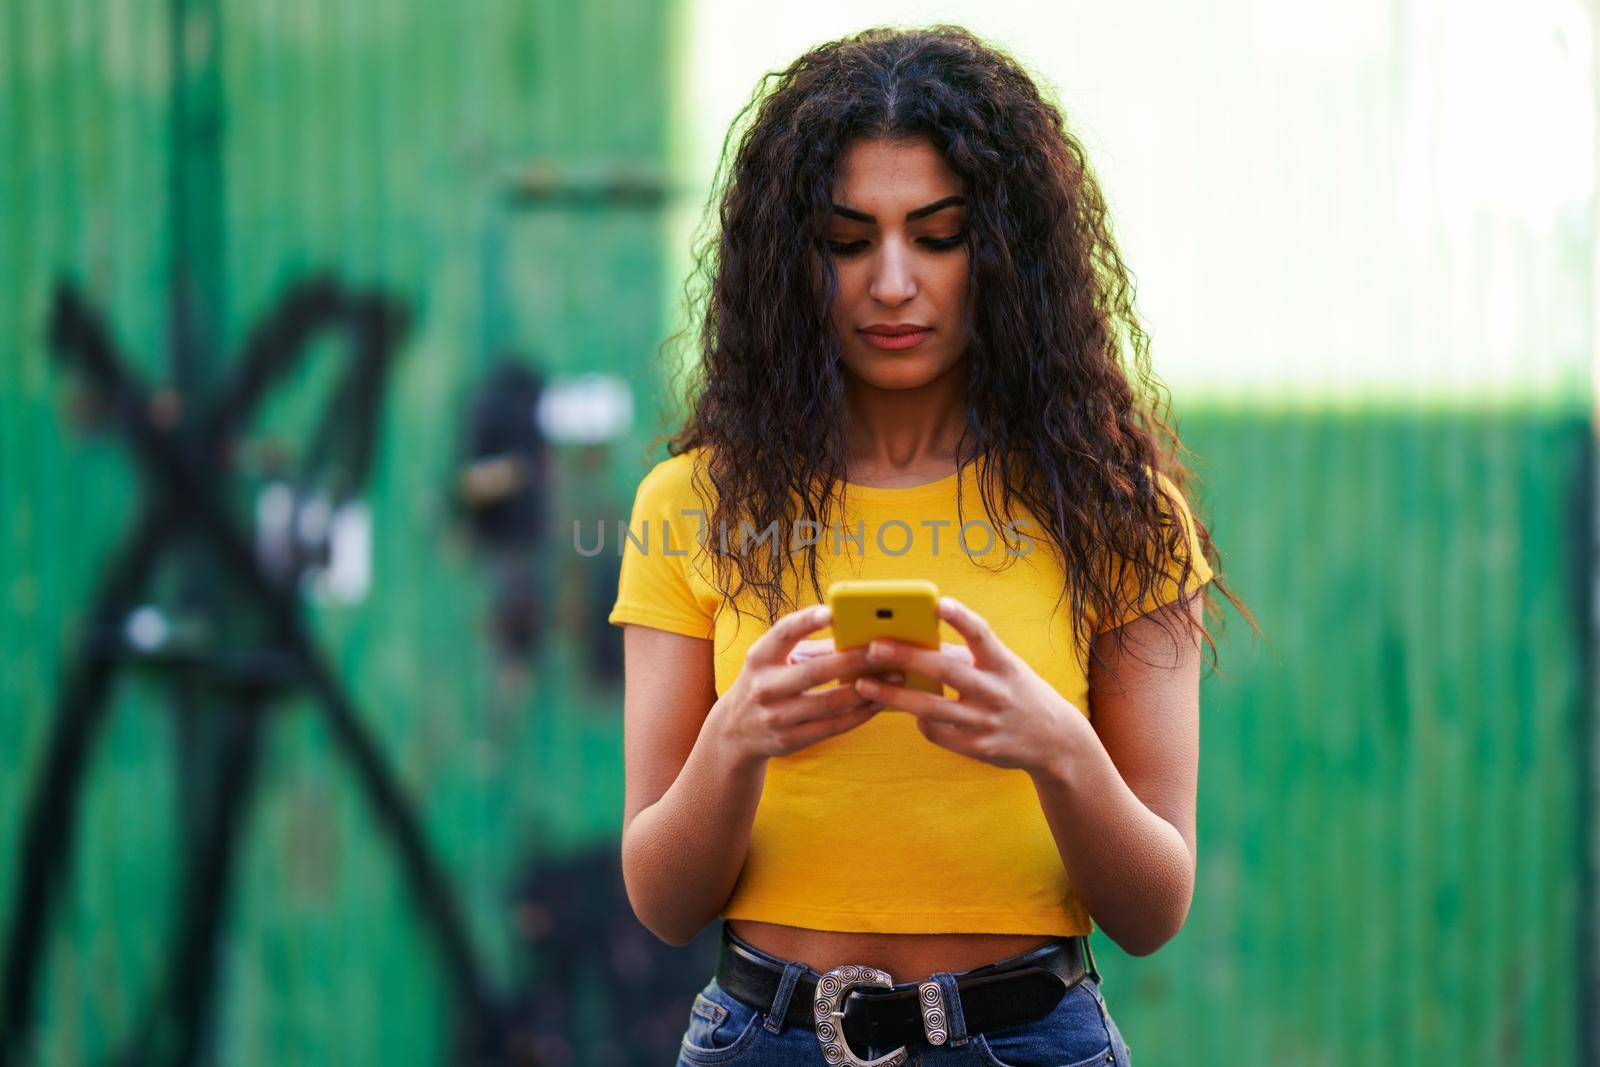 Young Arab woman texting a text message with her smartphone against green urban wall.